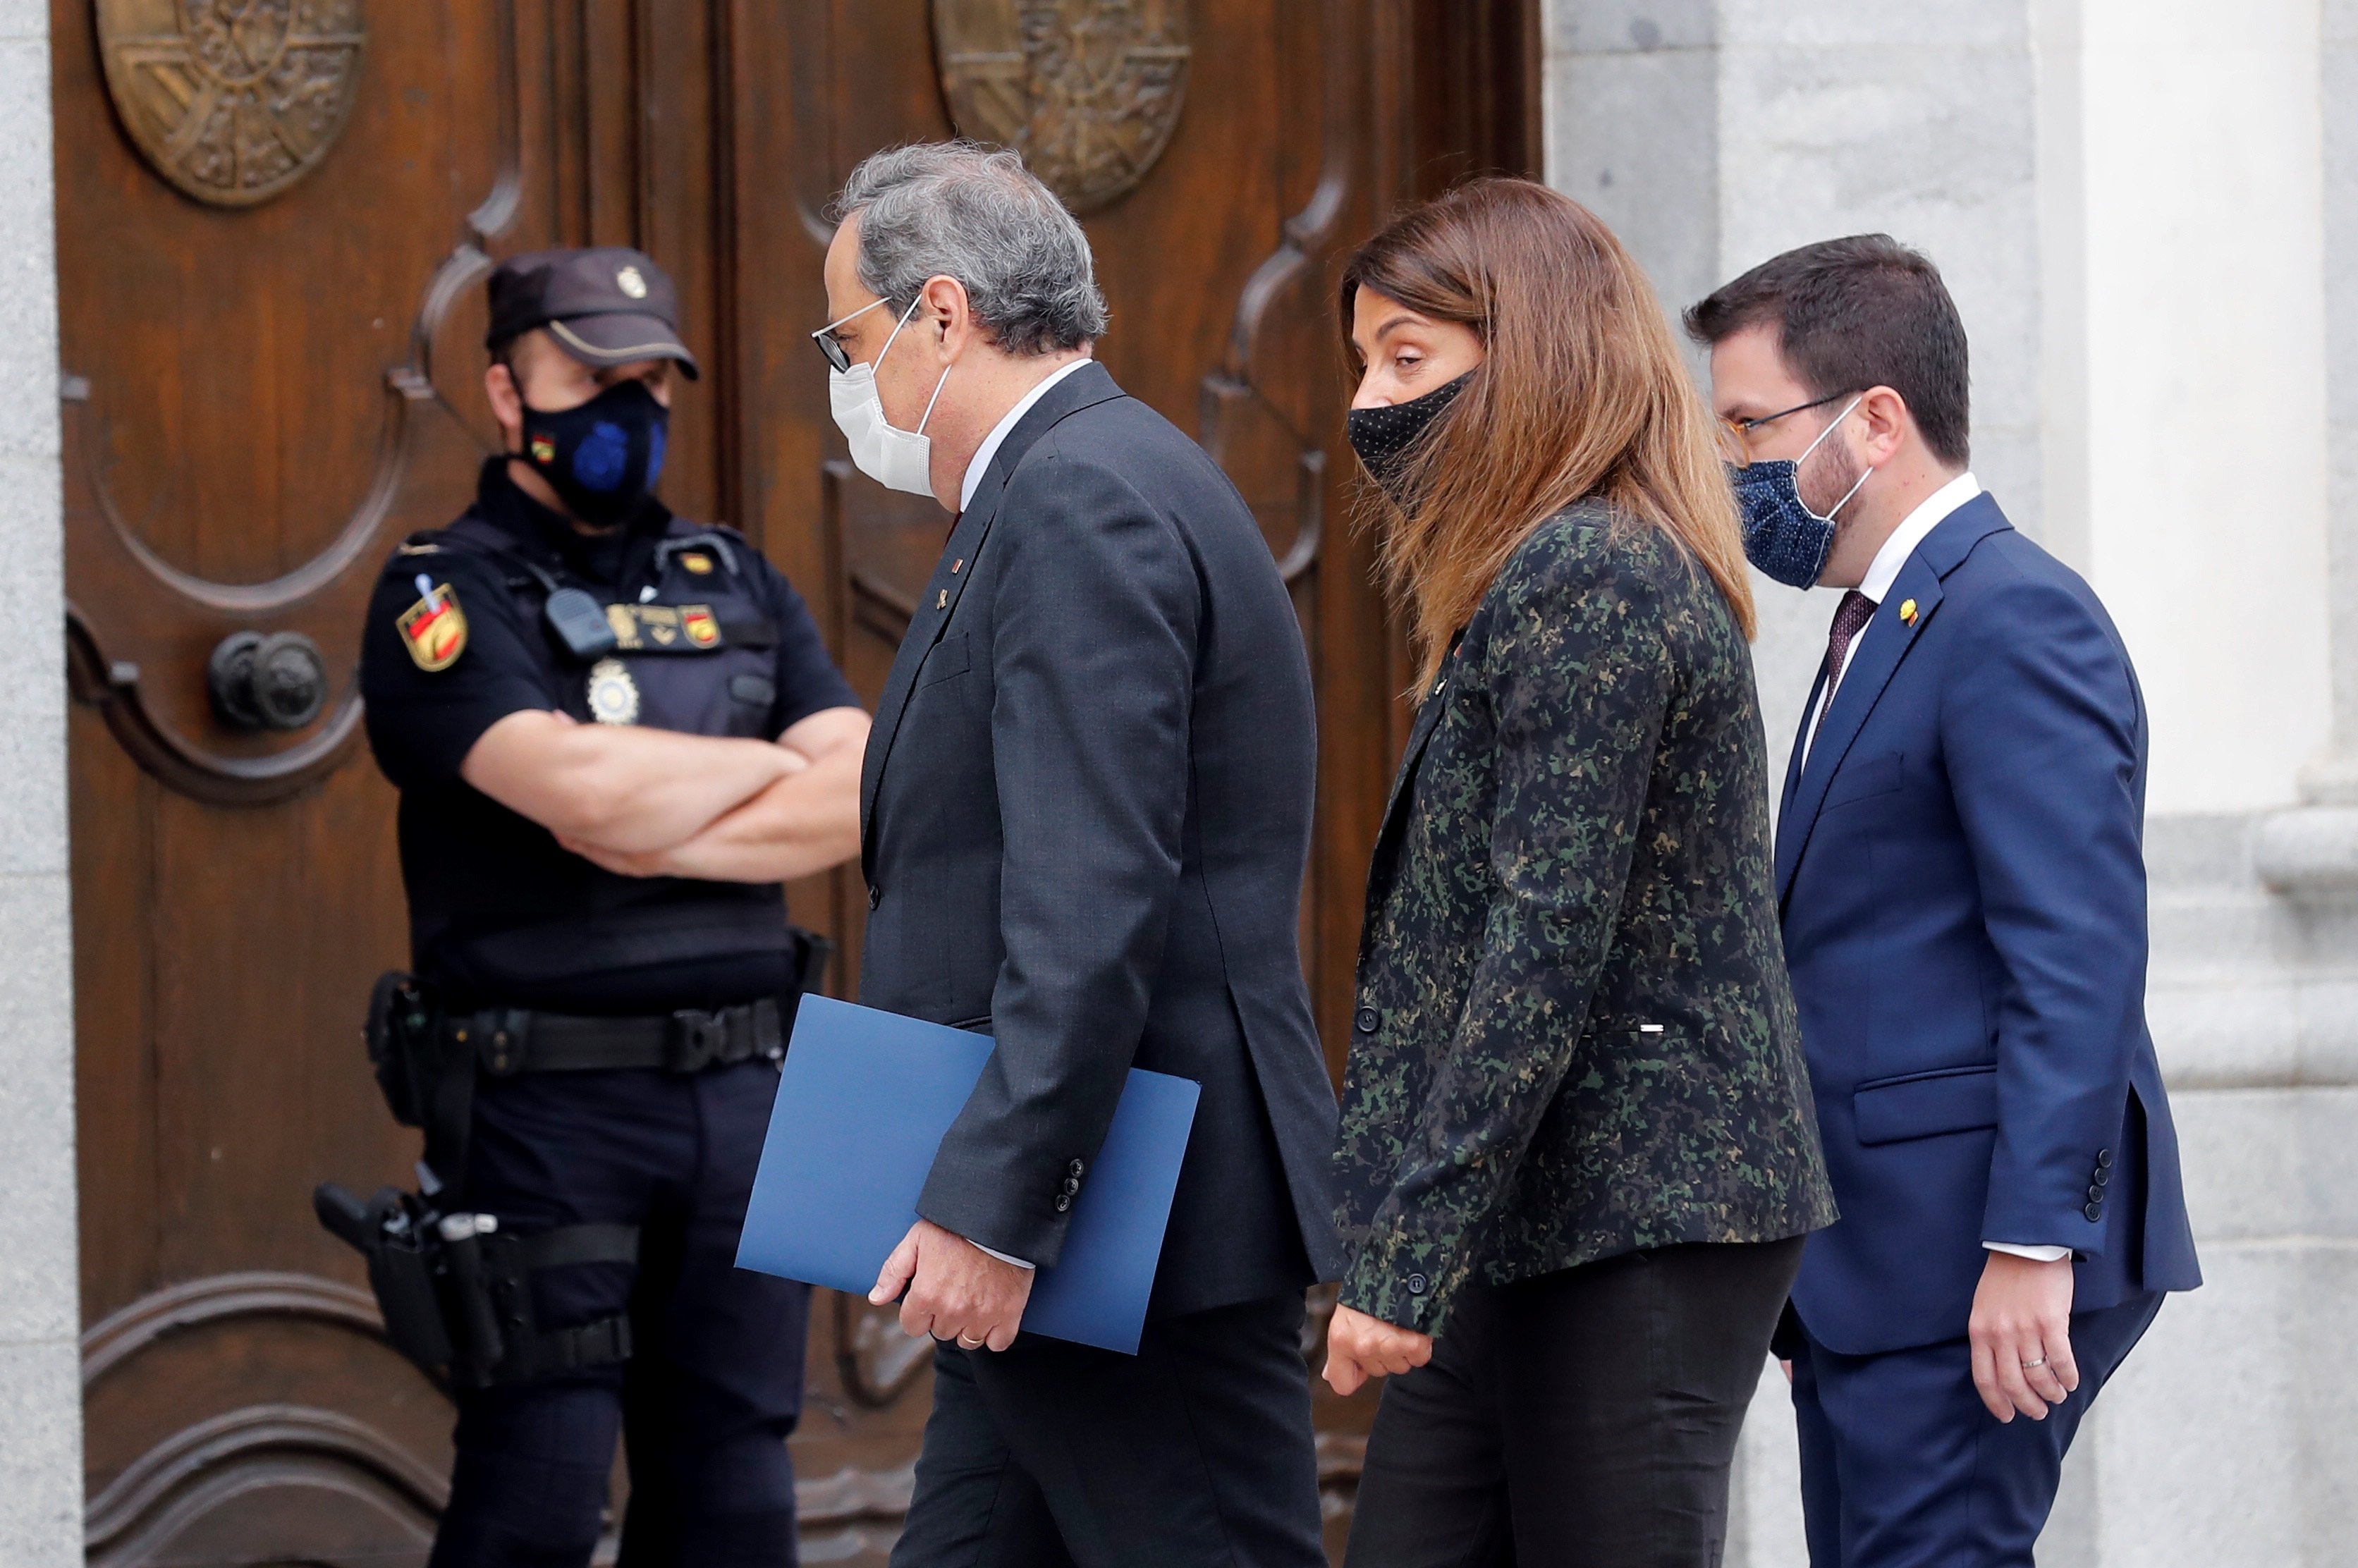 "The conflict has returned": world media report Catalan president's court case